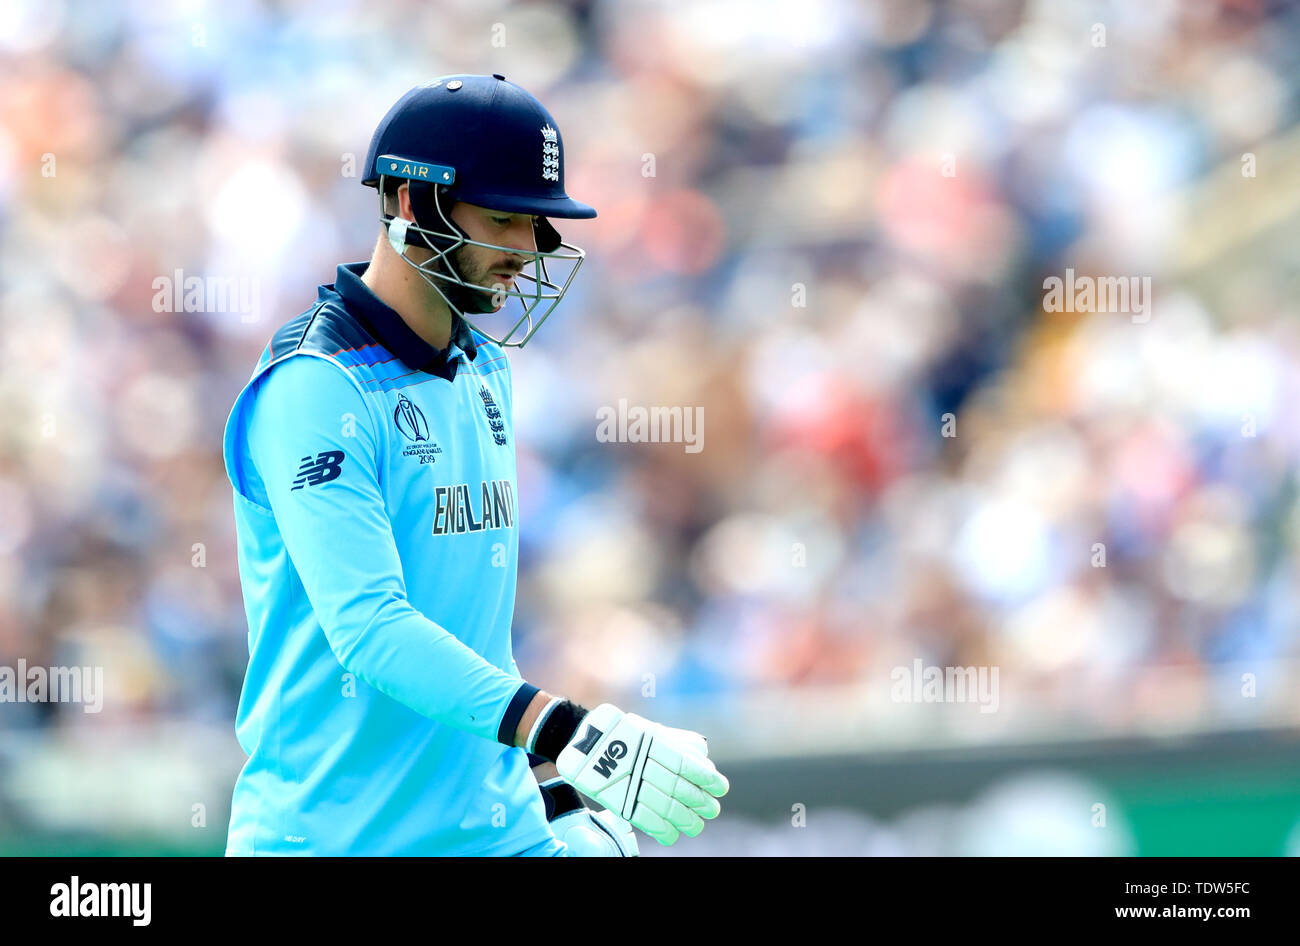 England's James Vince walks off after being dismissed by Sri Lanka's Lasith Malinga during the ICC Cricket World Cup group stage match at Headingley, Leeds. Stock Photo